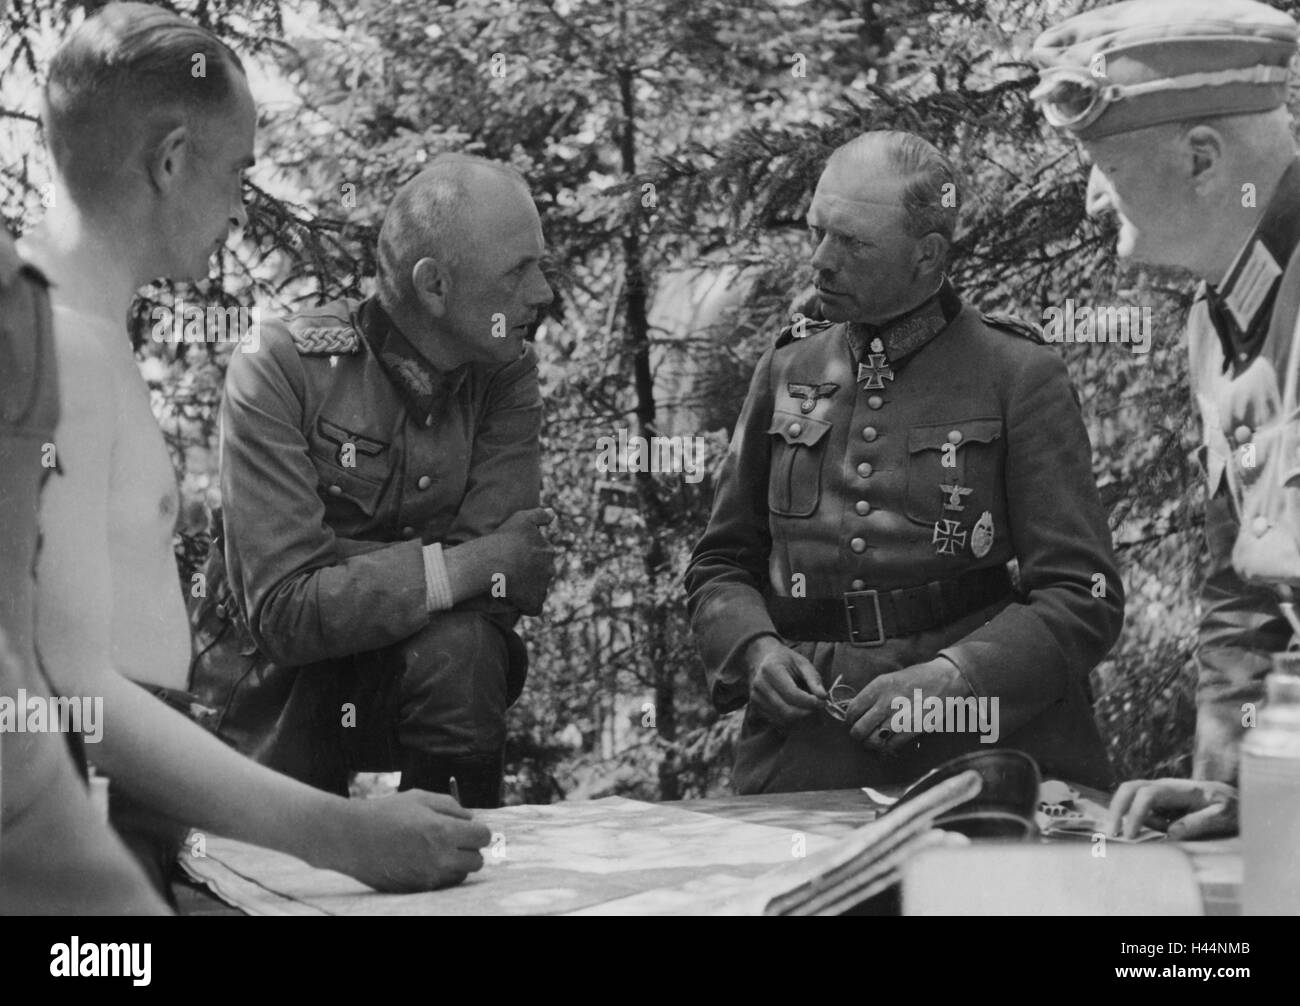 World War, Eastern Front, General Guderian, briefing, War, Military, Nazism, Wehrmacht army, warfare, men, commanders, maps, map, plan, talk, discussion, consultation, planning, 1944 Forest, exterior, historic, Stock Photo